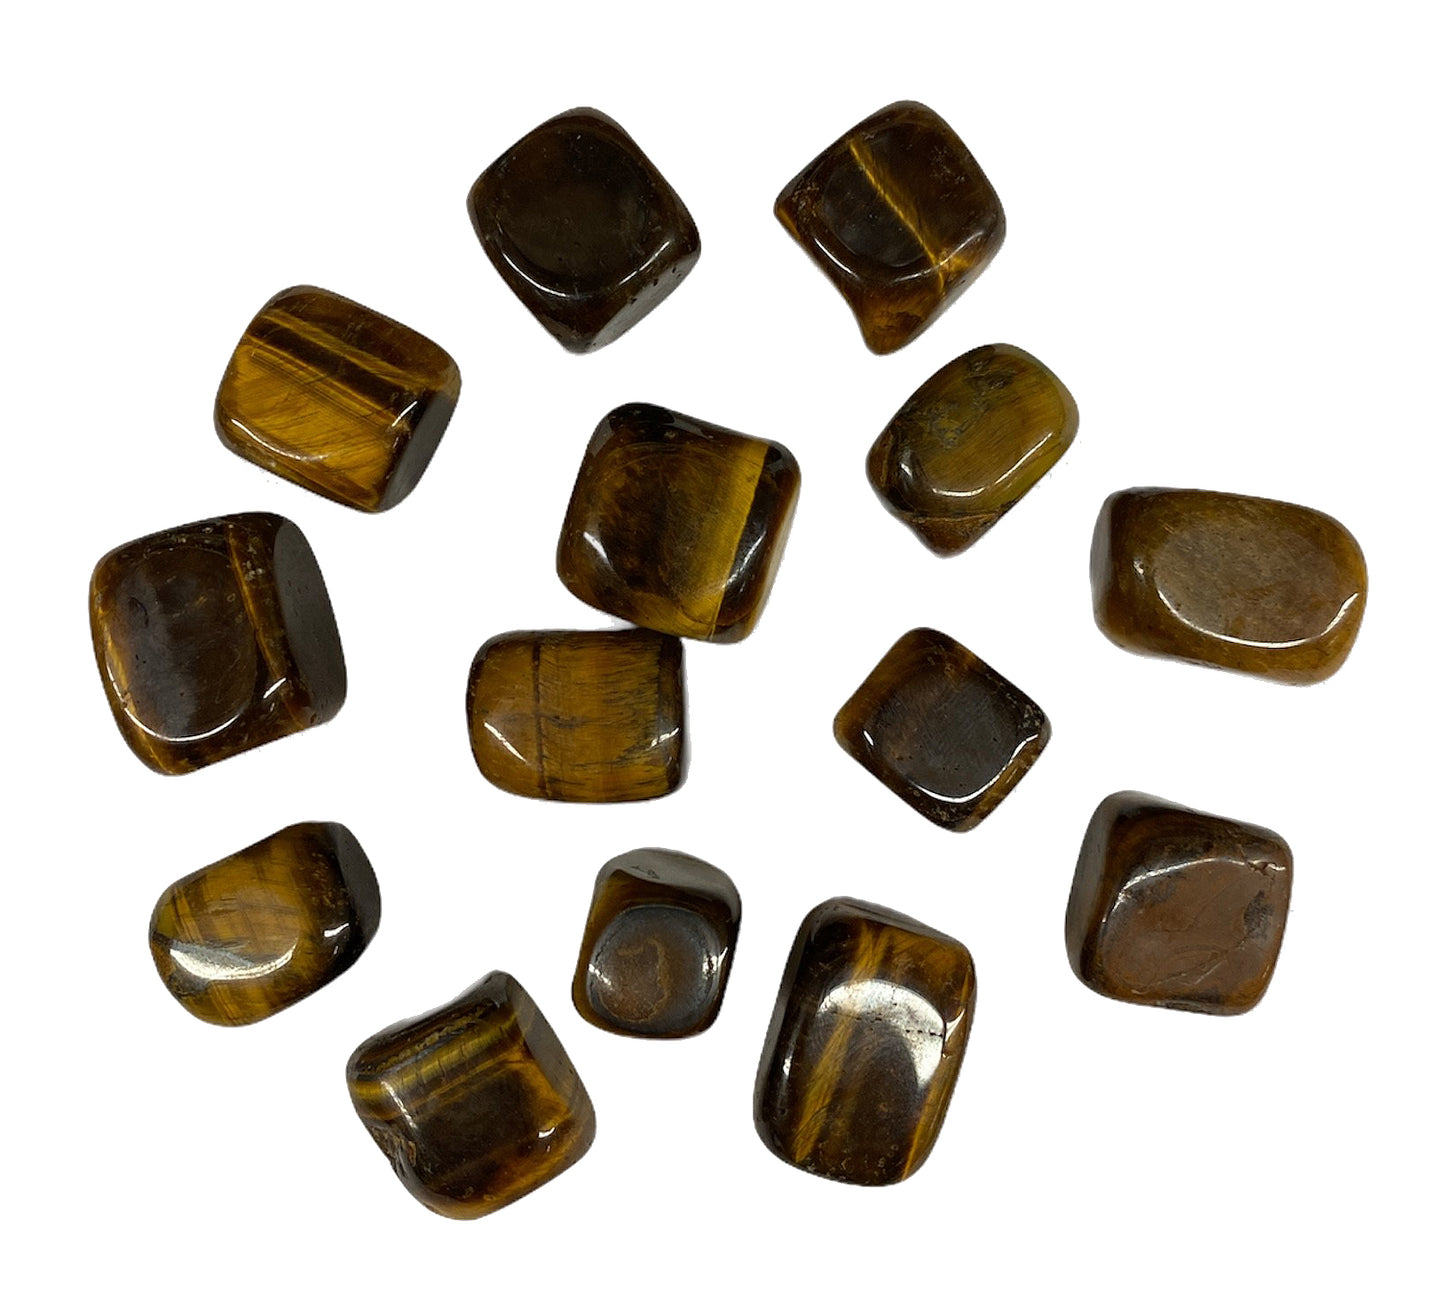 TIGER EYE Yellow Tumbled Stones - Medium 20 - 30 mm - 500 GRAMS 1.1 LB - China - believed to induce strength and willpower